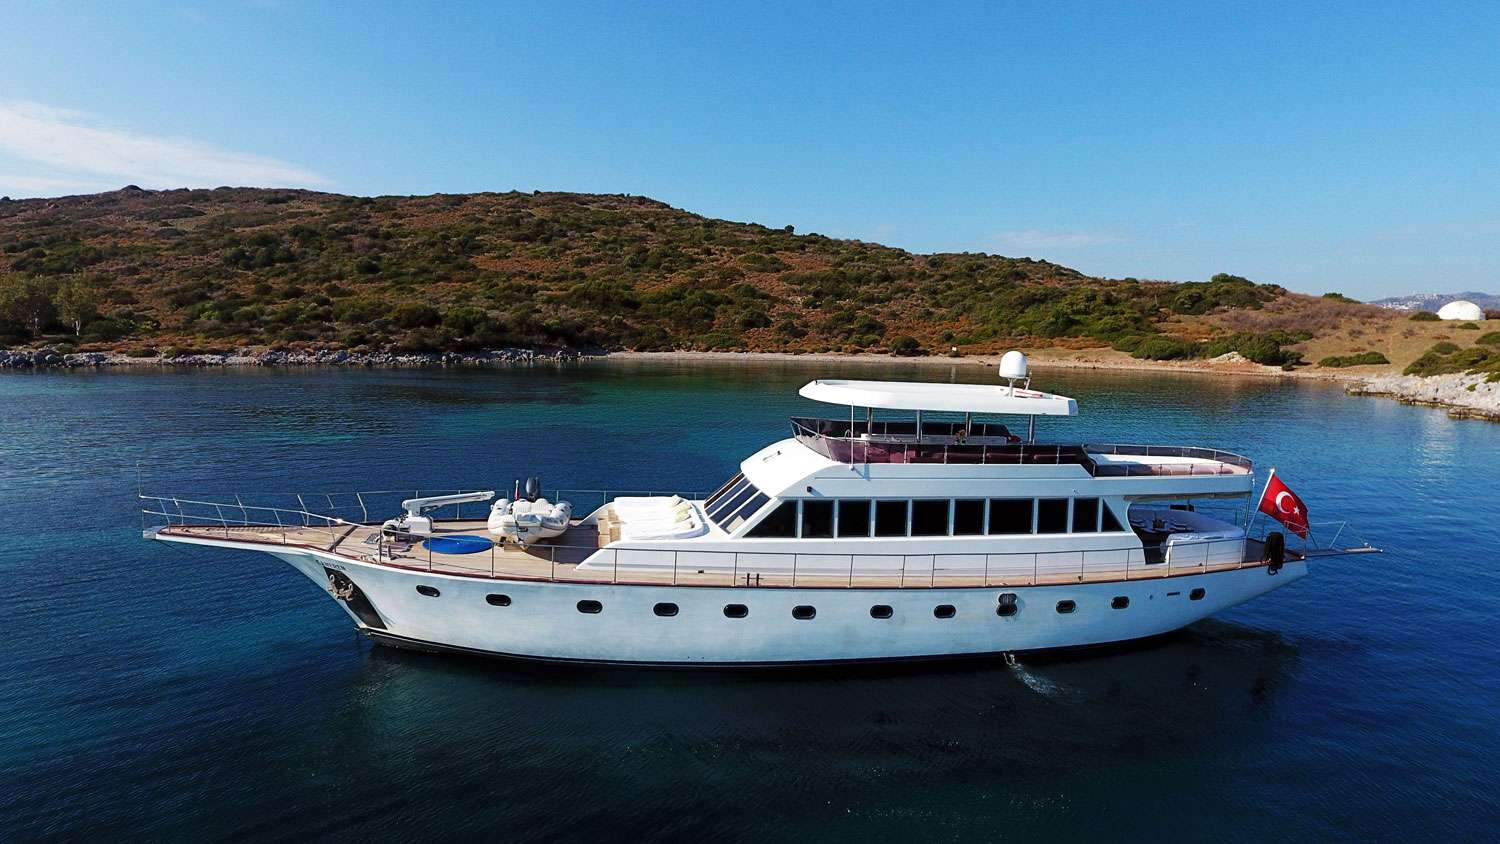 CANEREN - Yacht Charter Istanbul & Boat hire in Greece & Turkey 1